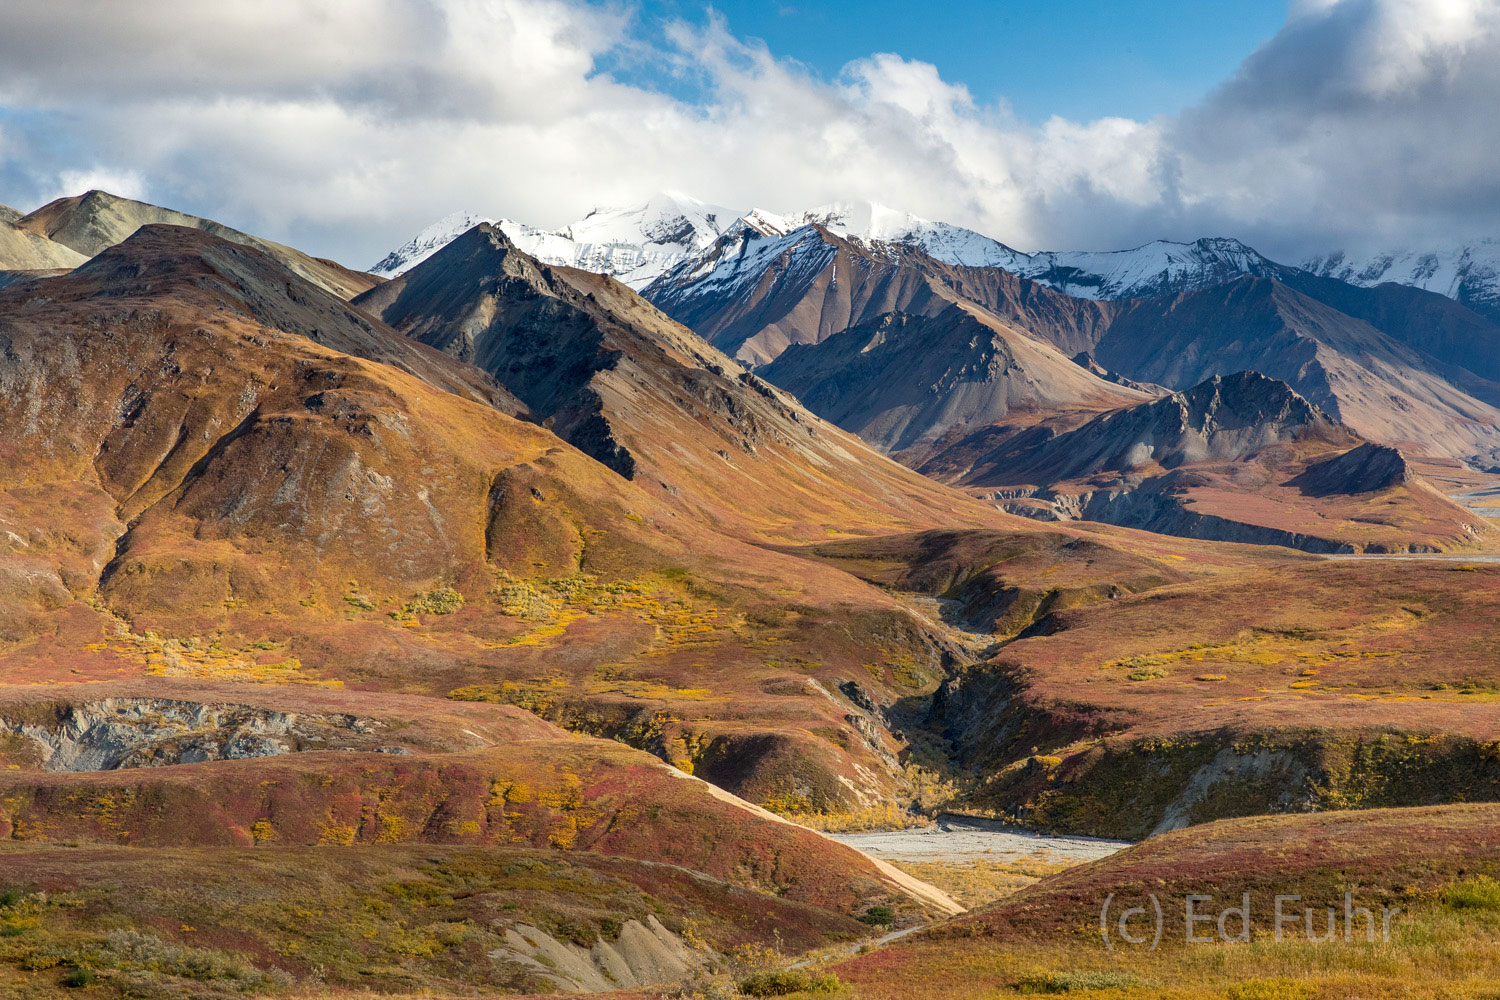 One of Denali's most sensational views can be found here at Thorofare Pass and Gorge Creek